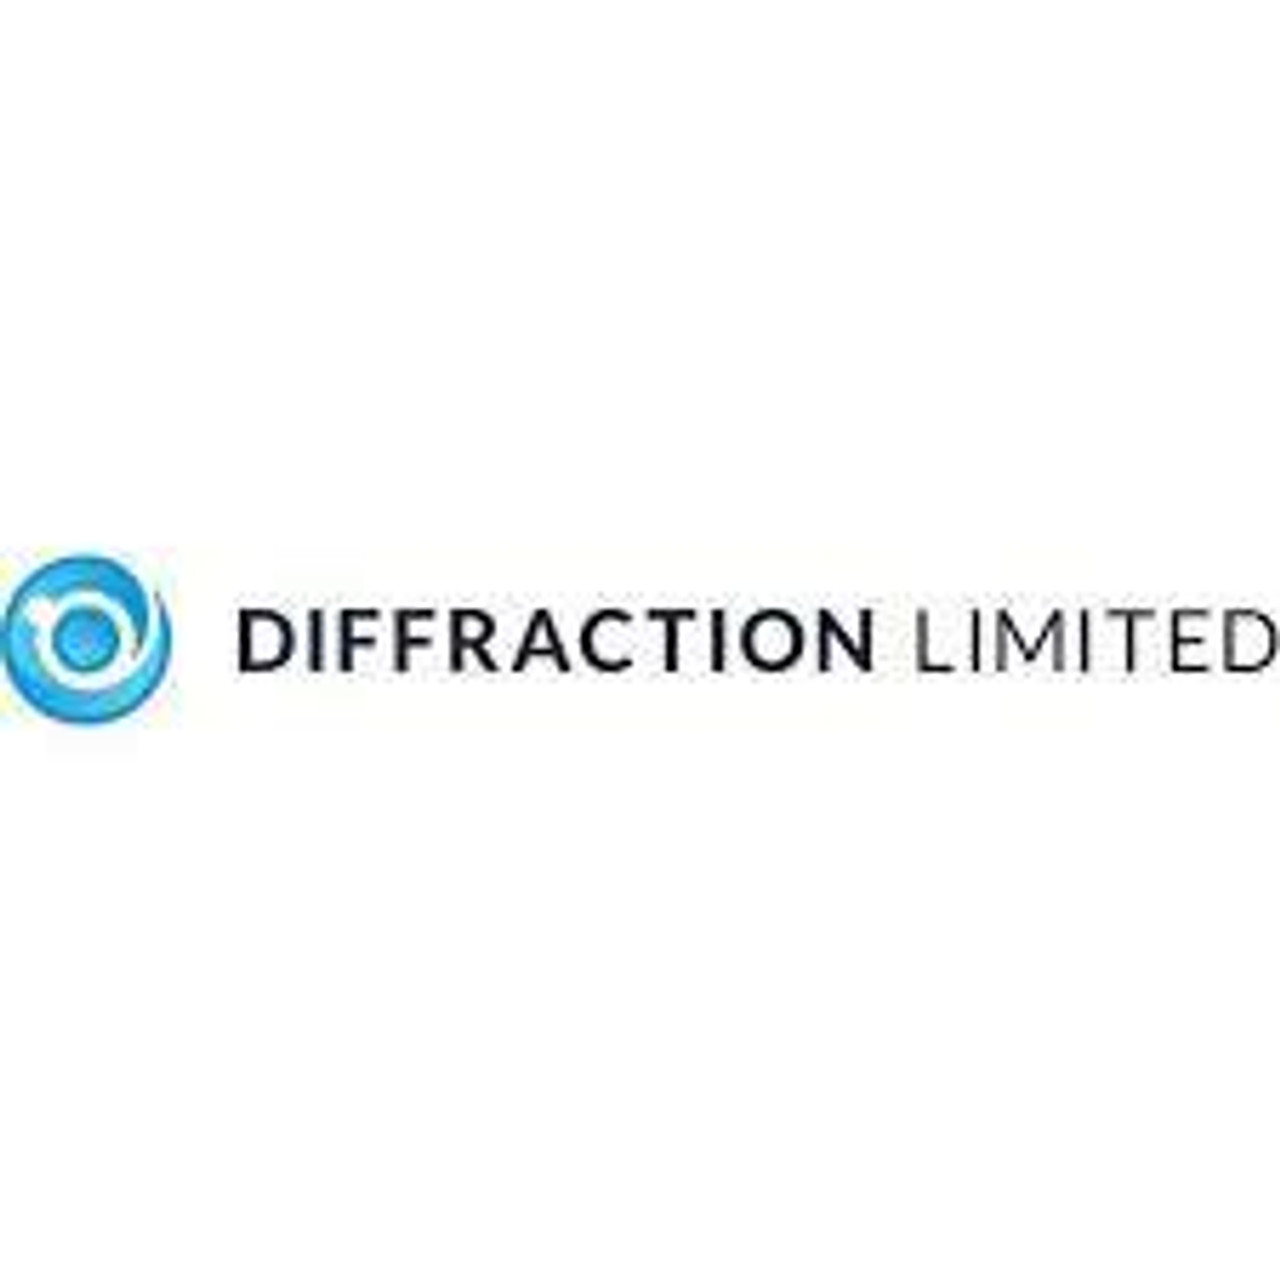 Differaction Limited